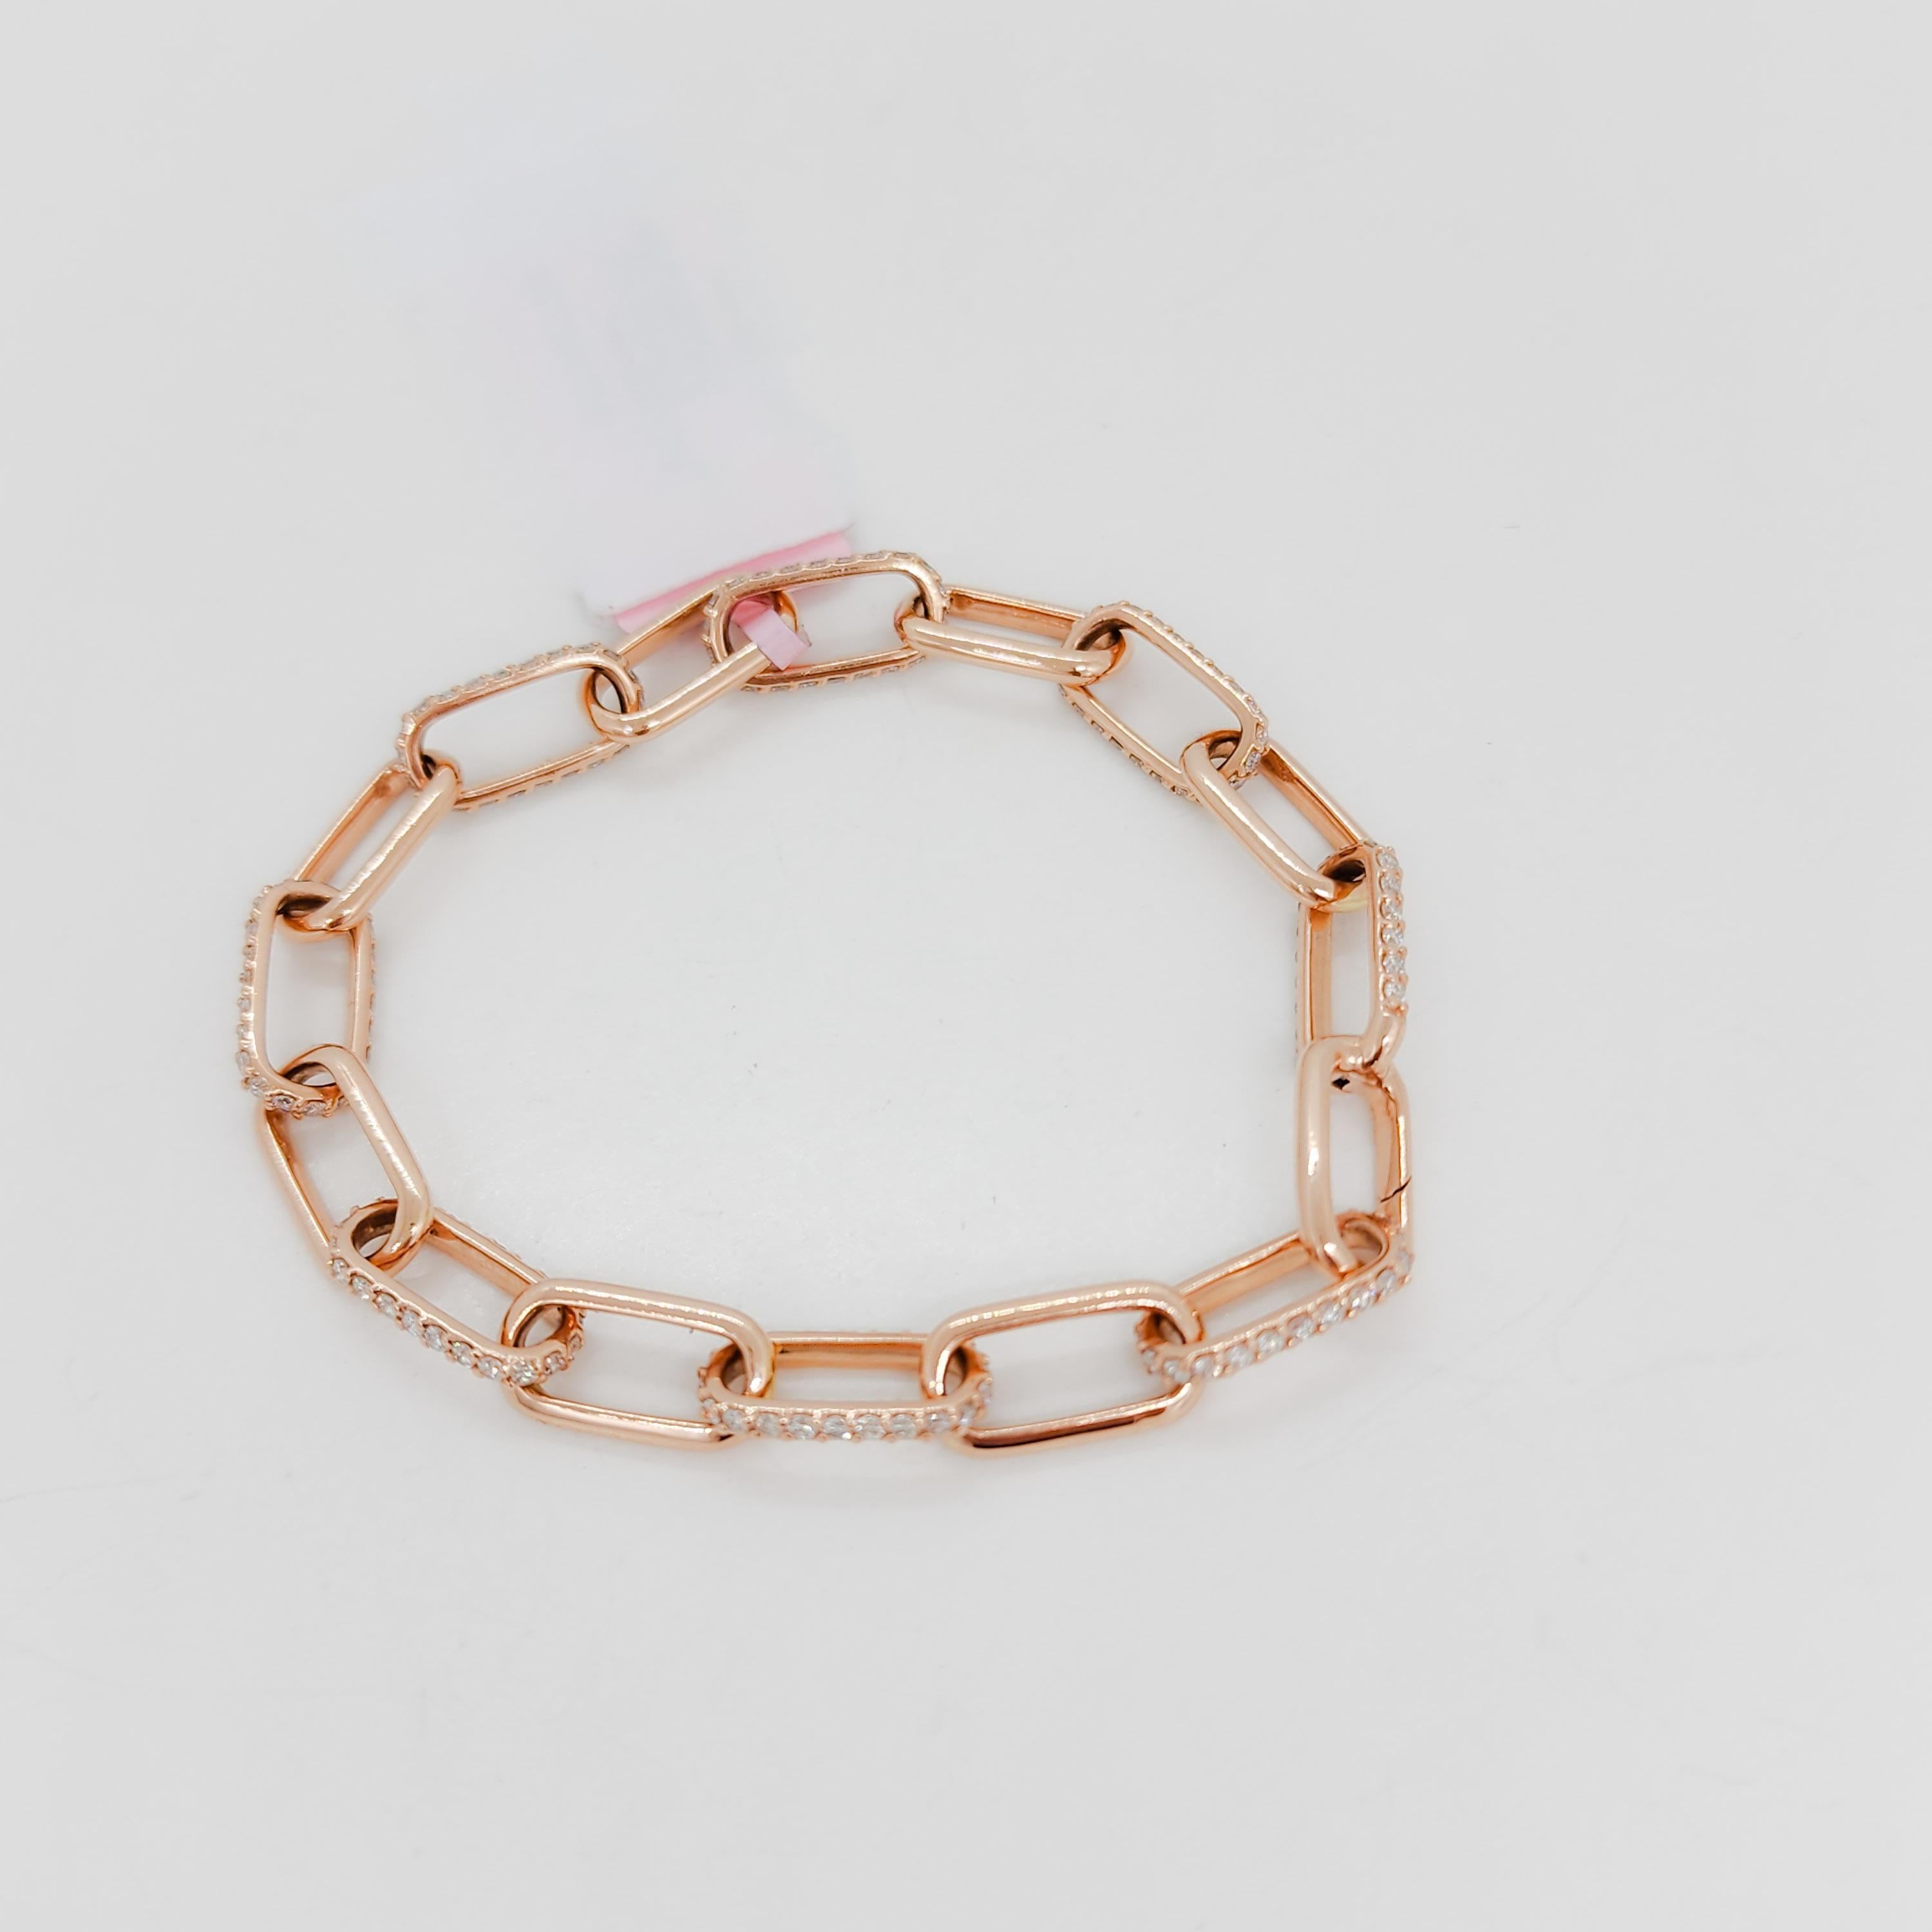 Gorgeous and fun 1.98 ct. good quality white diamond rounds in a handmade 14k rose gold chain link bracelet.  Length is 7